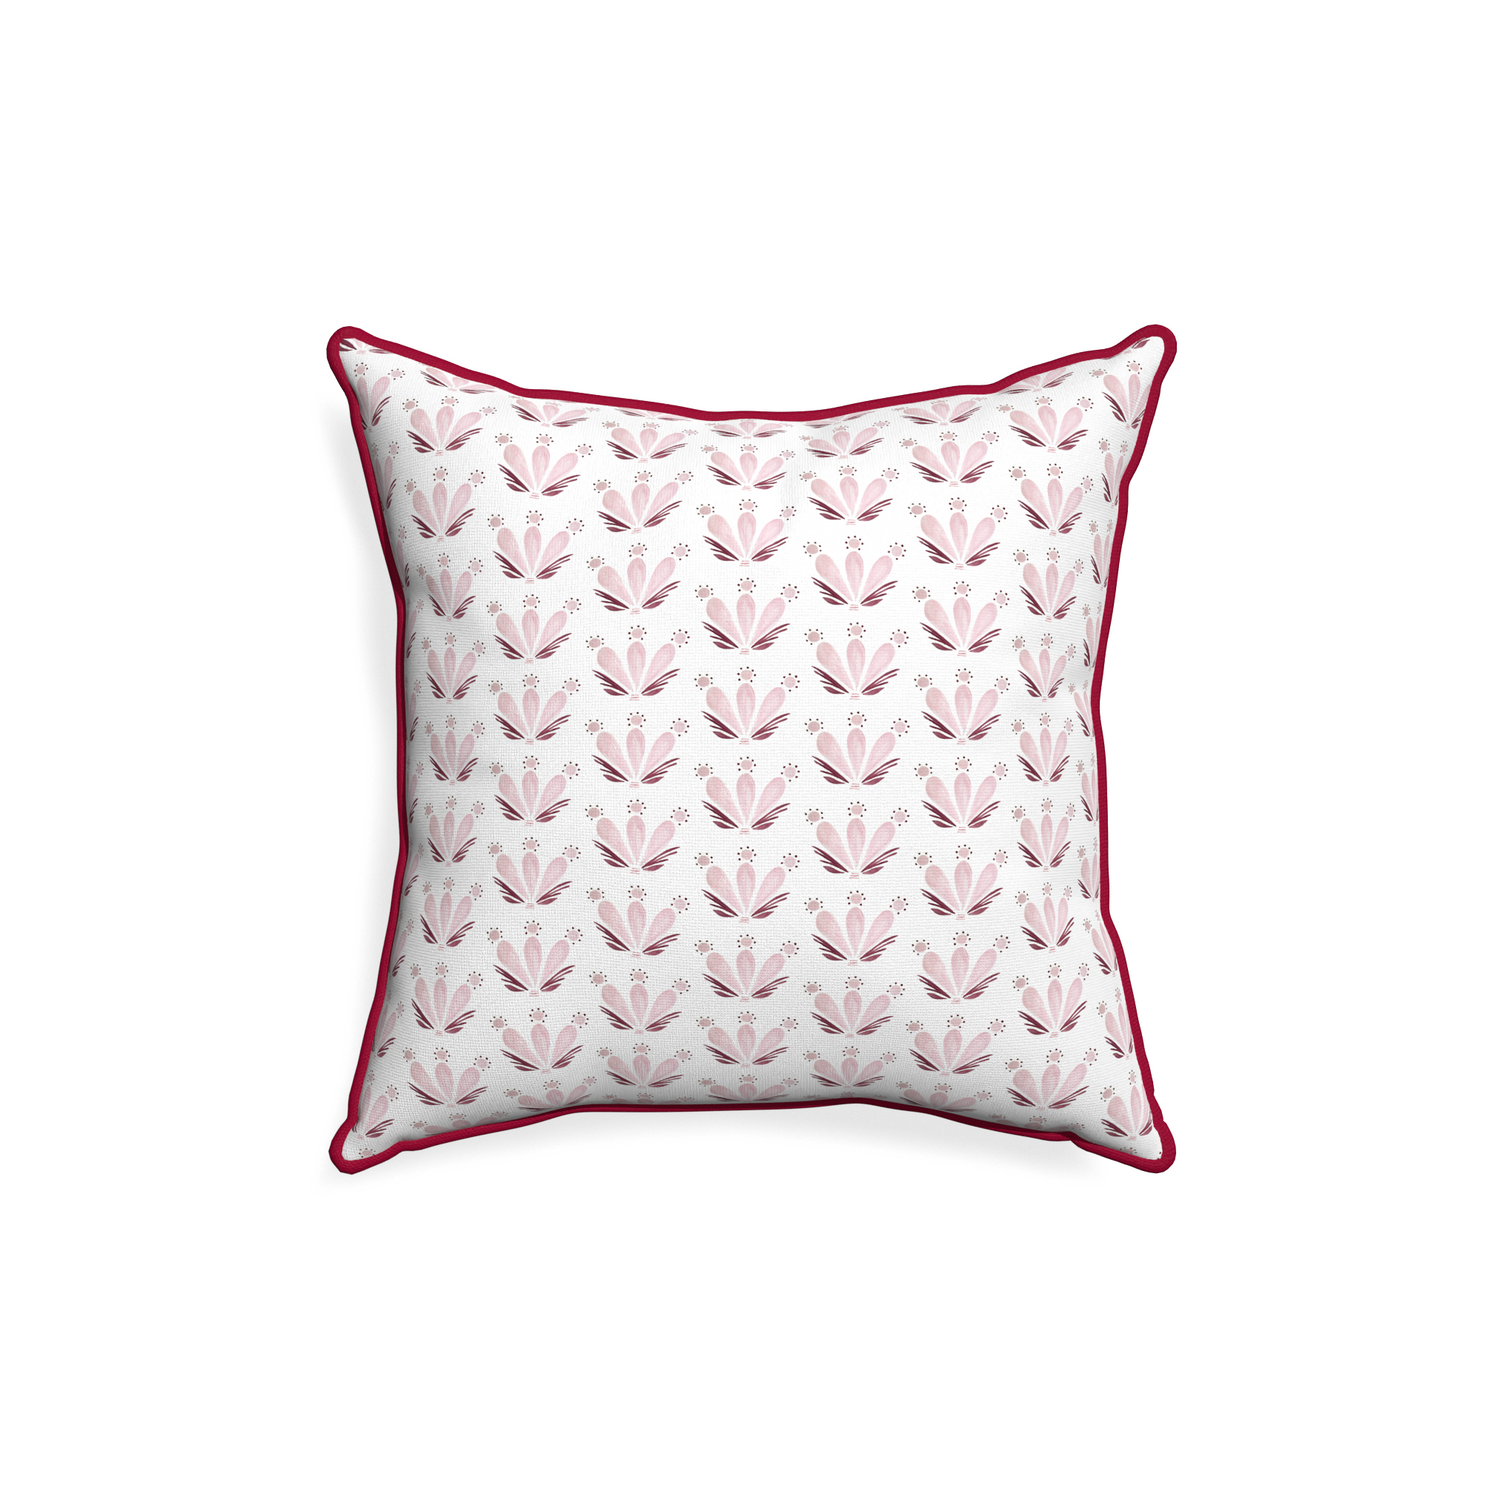 18-square serena pink custom pillow with raspberry piping on white background